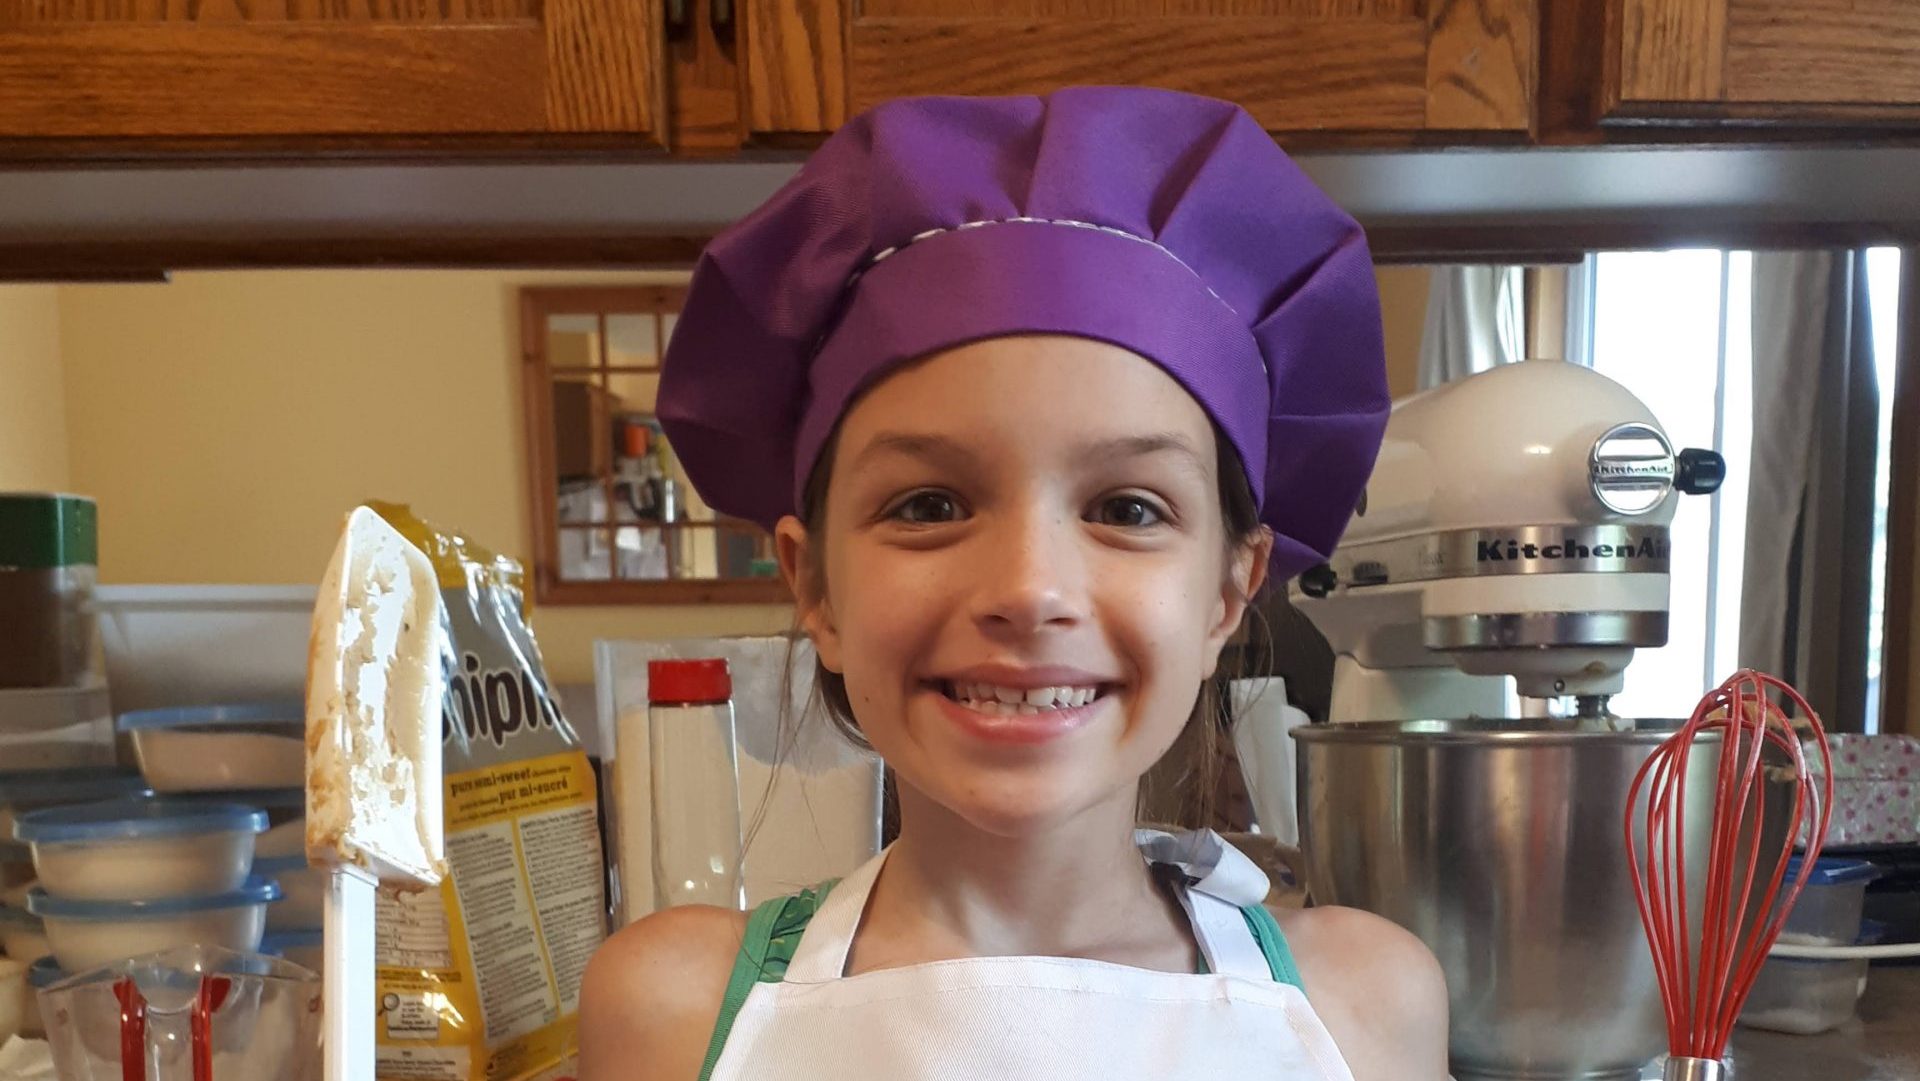 Alyssa Lodge standing in her kitchen wearing a purple chef's hat, white apron with her name displayed, holding kitchen tools in each hand